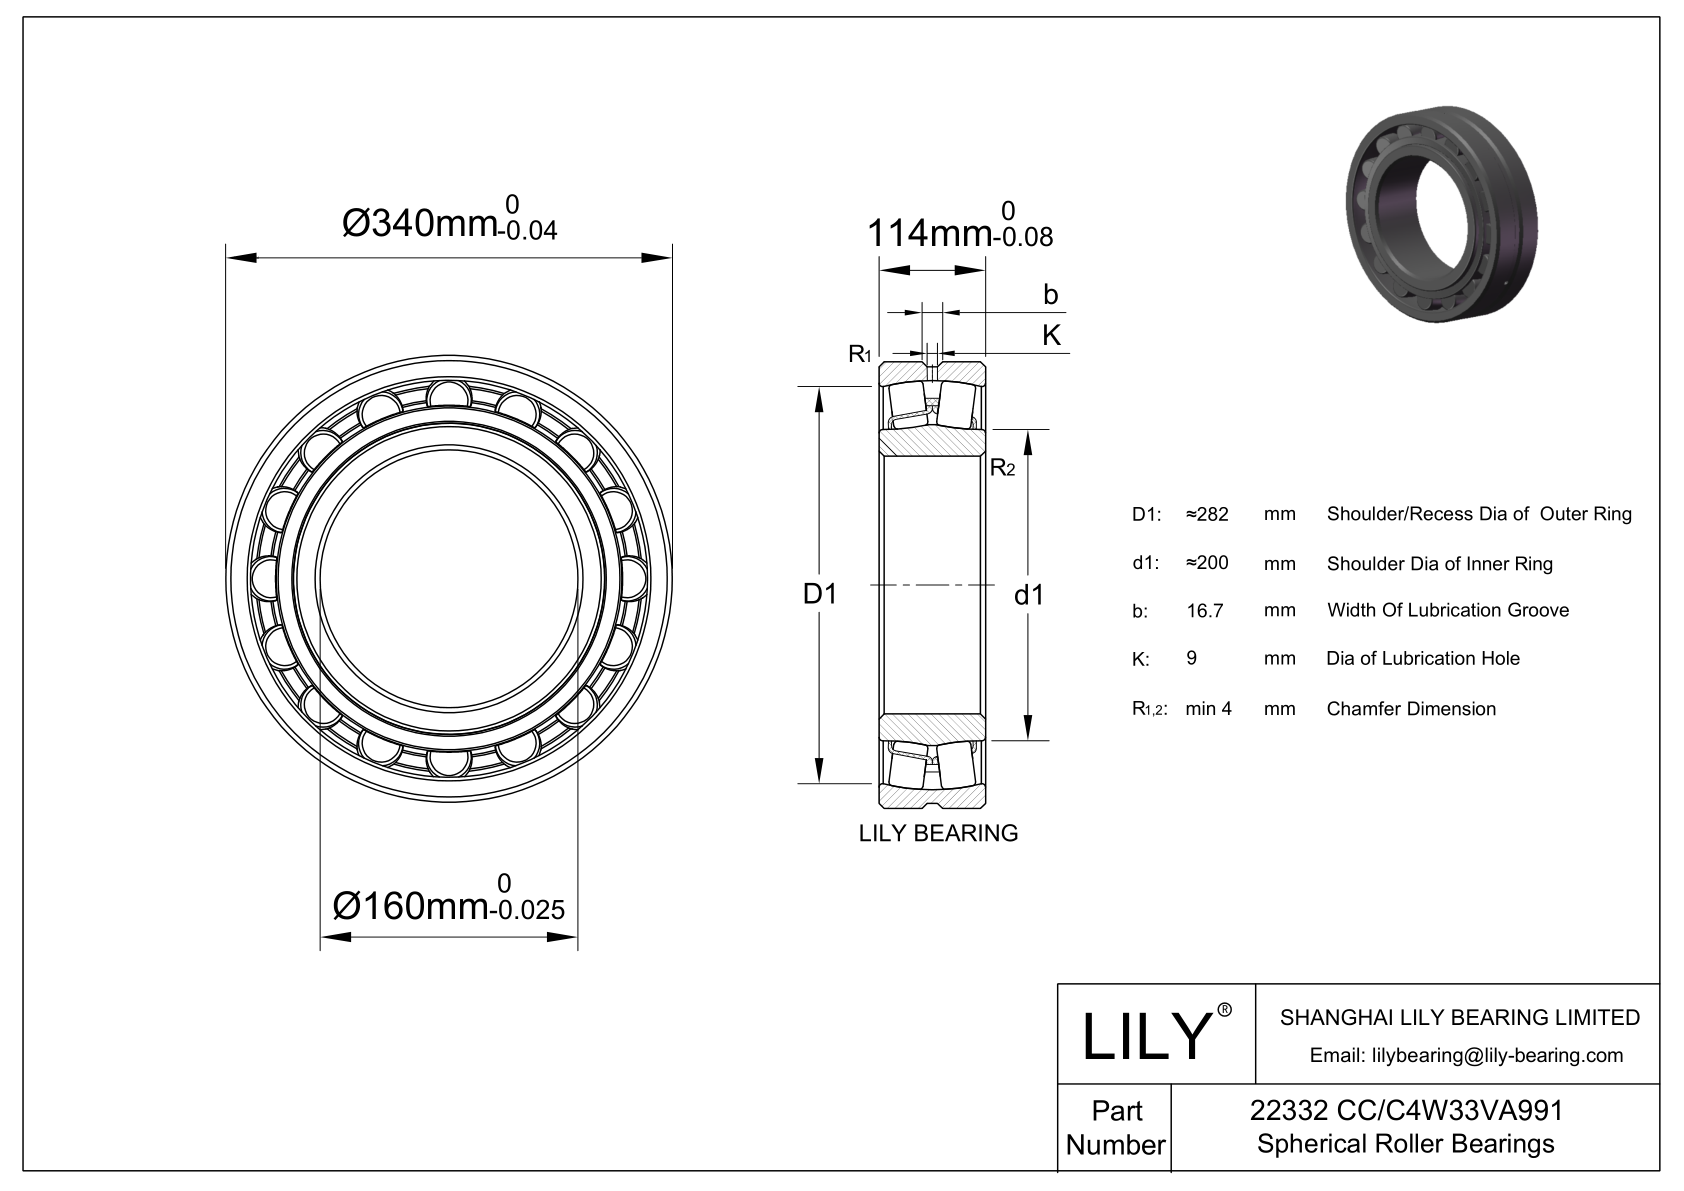 22332 CC/C4W33VA991 Double Row Spherical Roller Bearing cad drawing